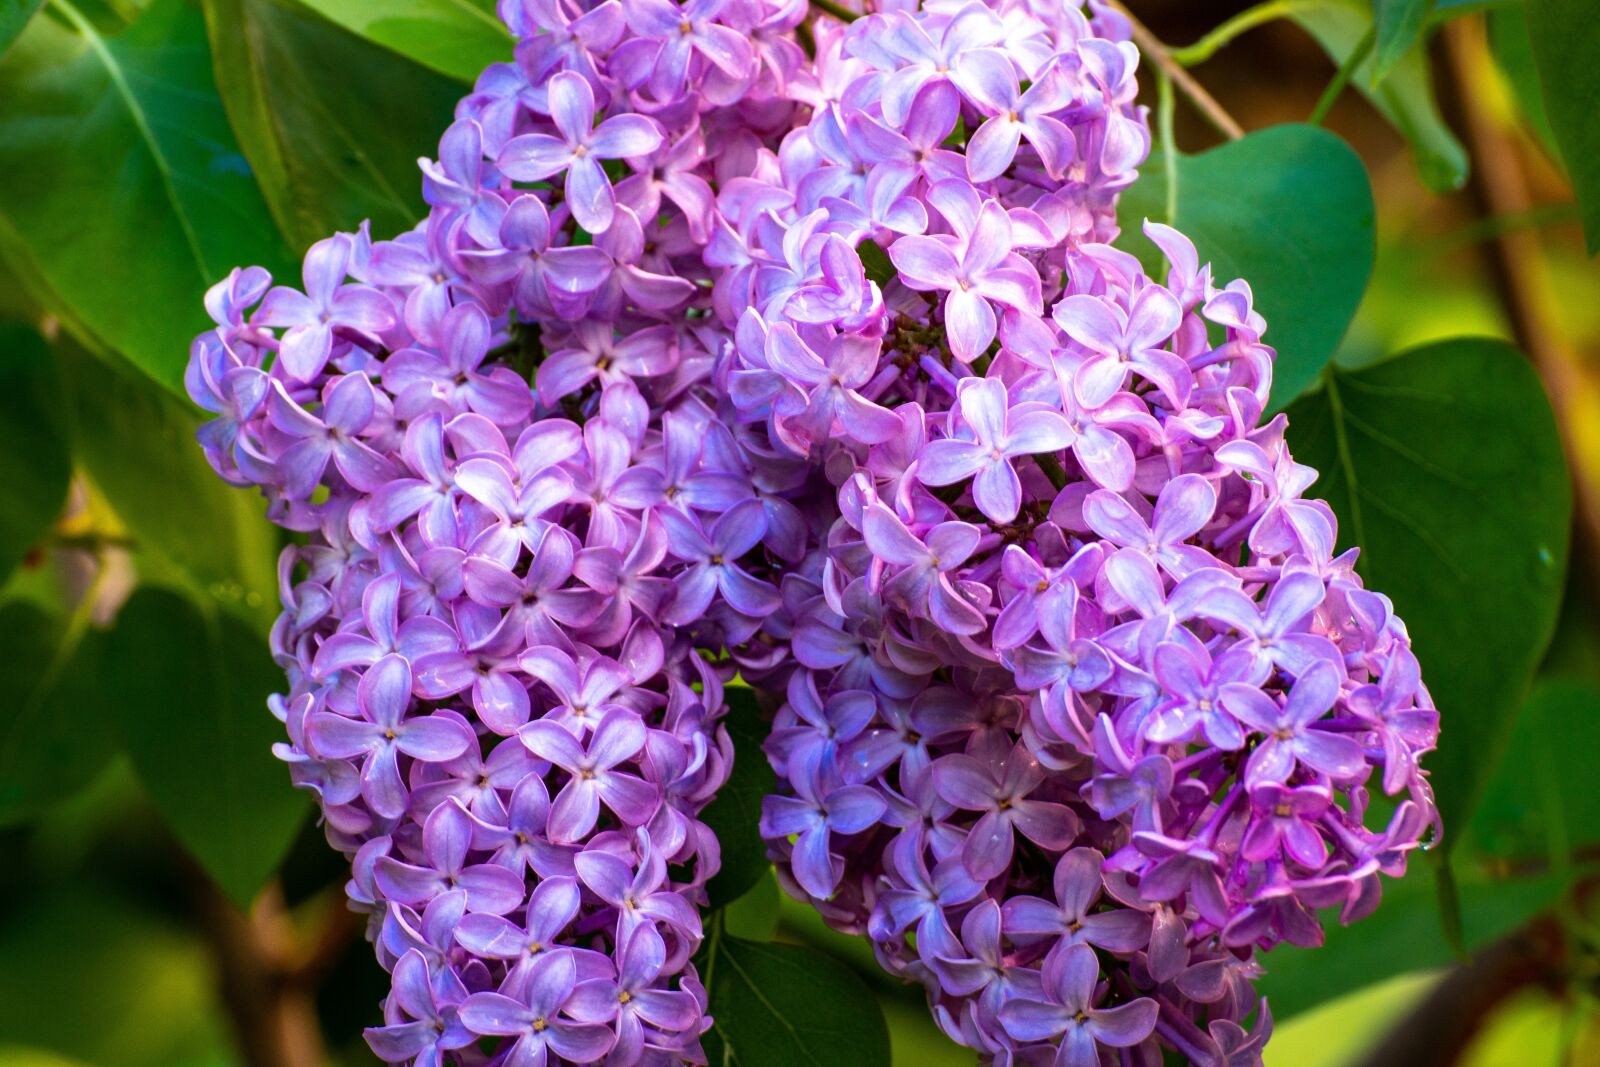 Sony a6500 sample photo. Lilacs, flowers, flower photography